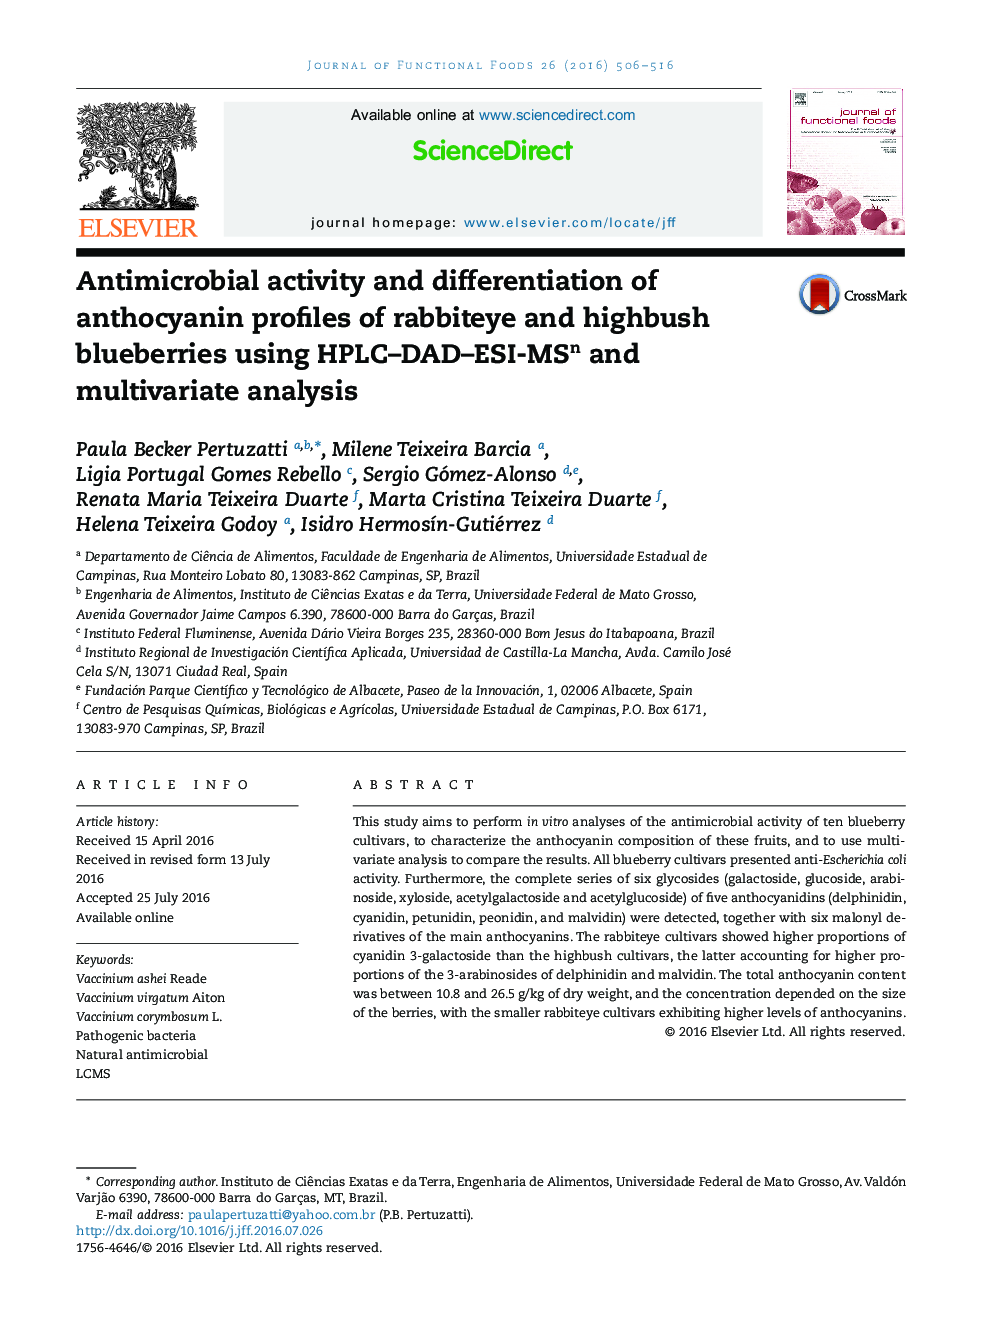 Antimicrobial activity and differentiation of anthocyanin profiles of rabbiteye and highbush blueberries using HPLC-DAD-ESI-MSn and multivariate analysis